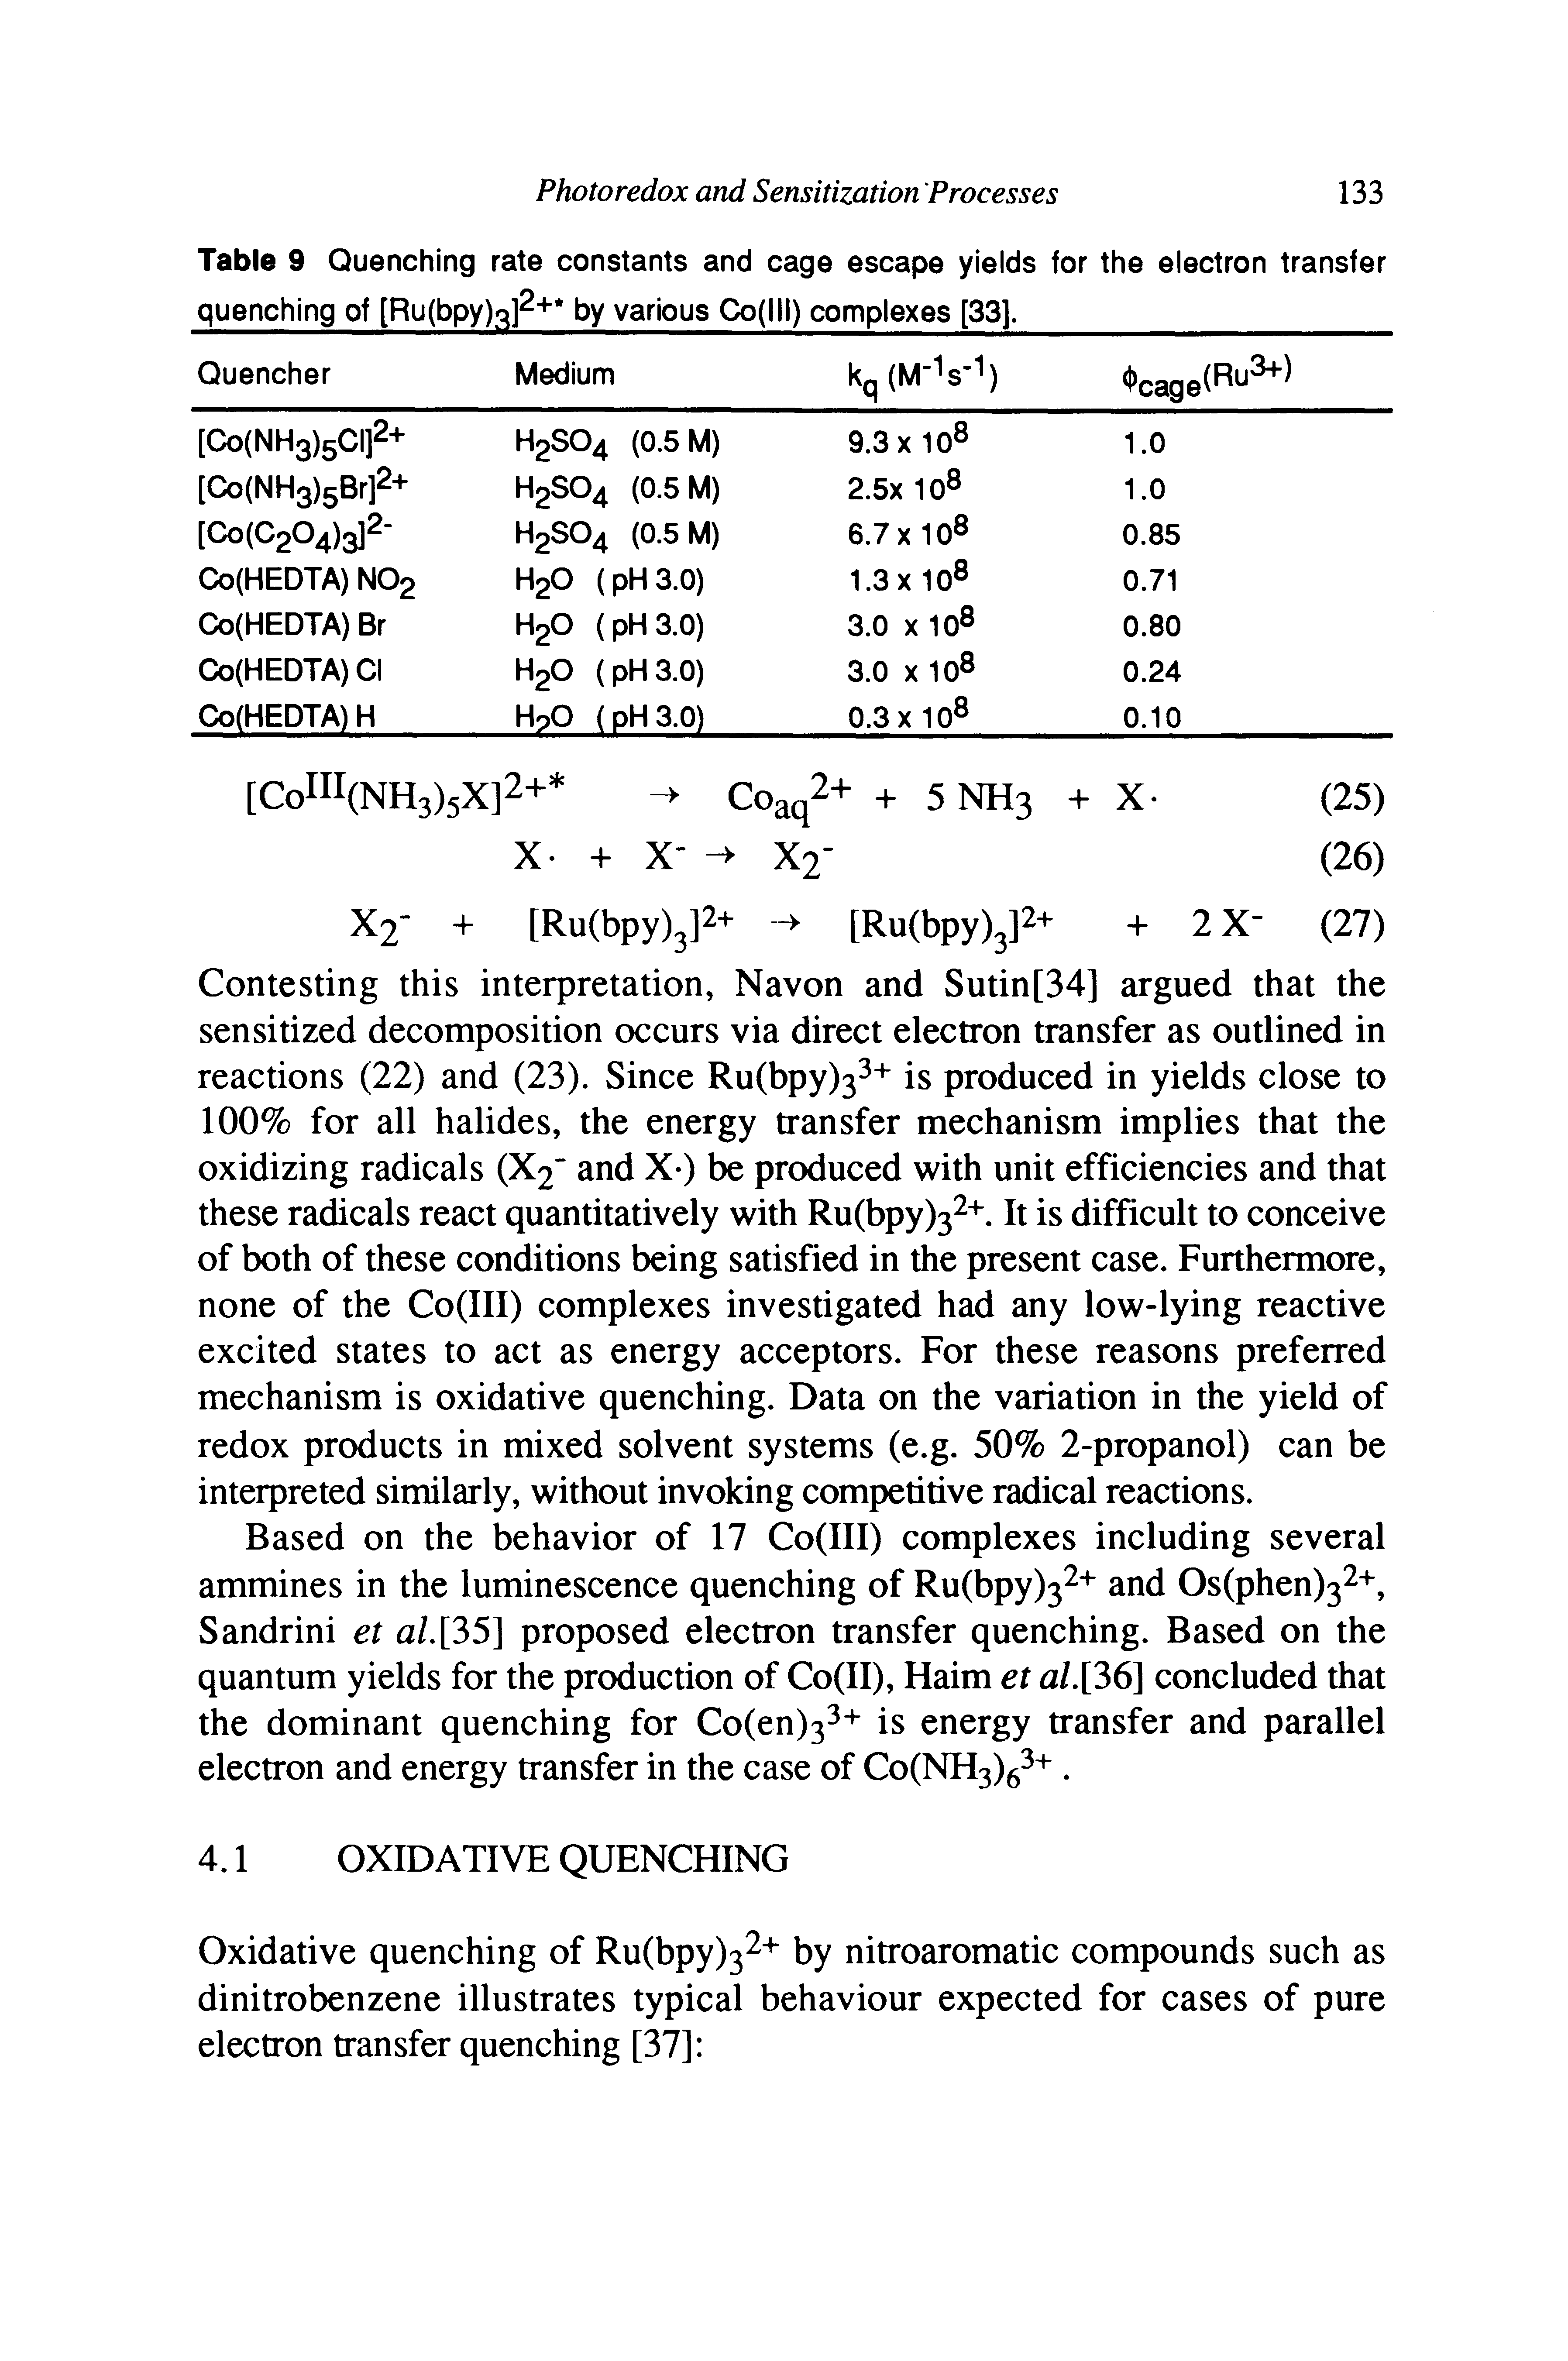 Table 9 Quenching rate constants and cage escape yields for the electron transfer quenching of [Ru(bpy)q] by various Co(lll) complexes [33]. ...